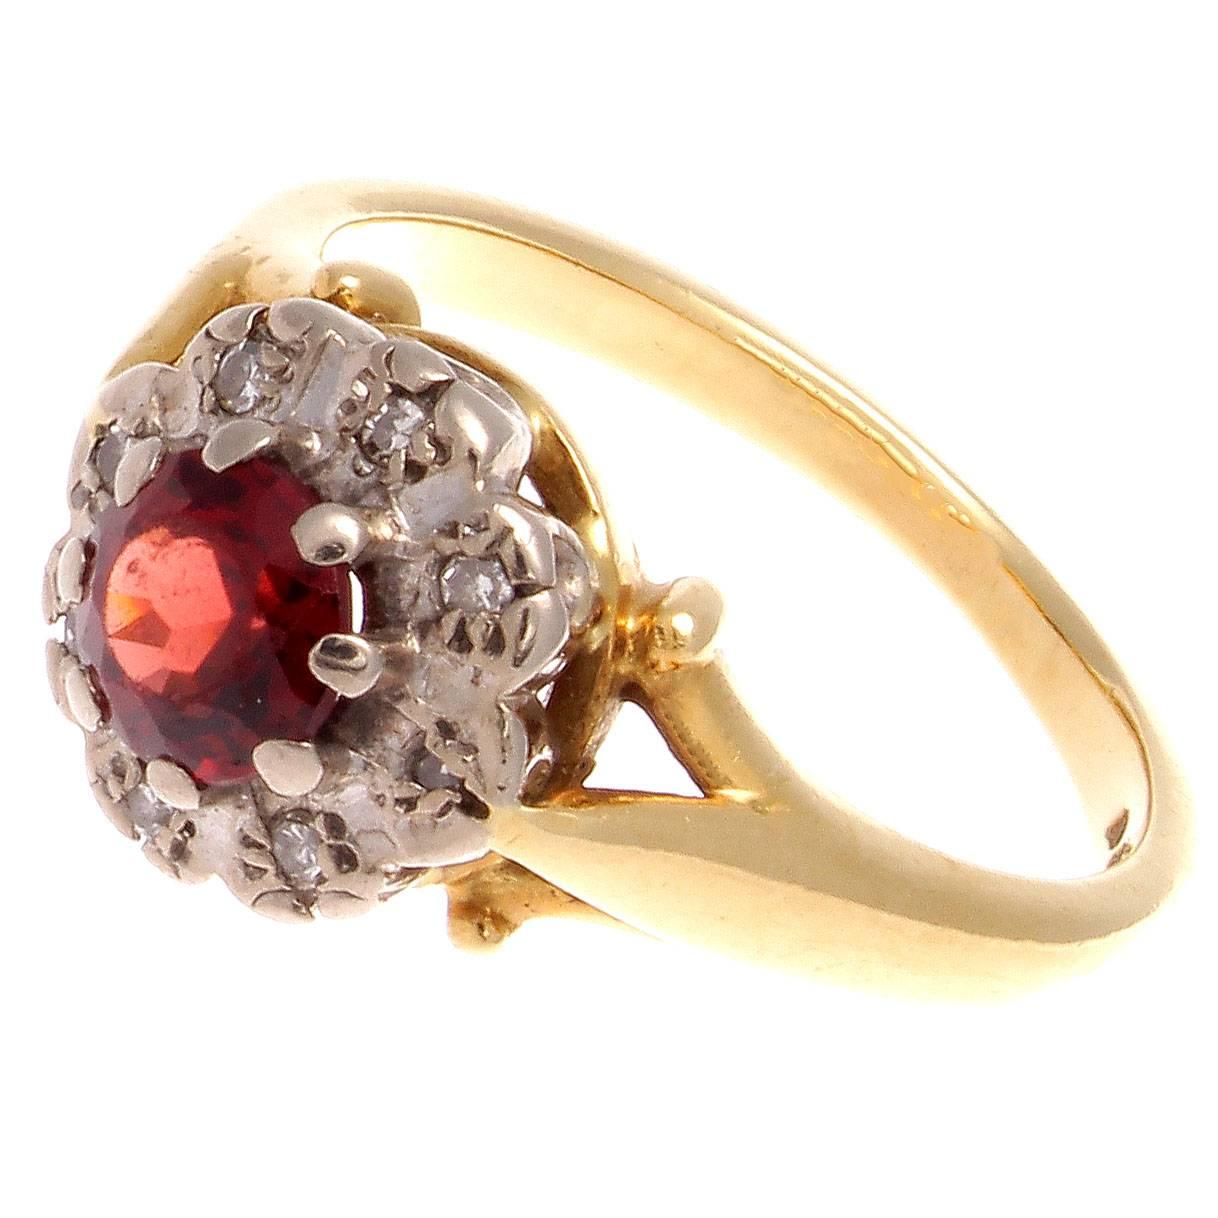 A lovely representation of the romantic period during the Victorian era where bright colors insinuated the love between the king and queen as well as the prosperity in the realm. 

This classic cluster ring features a vibrant orange armadine garnet